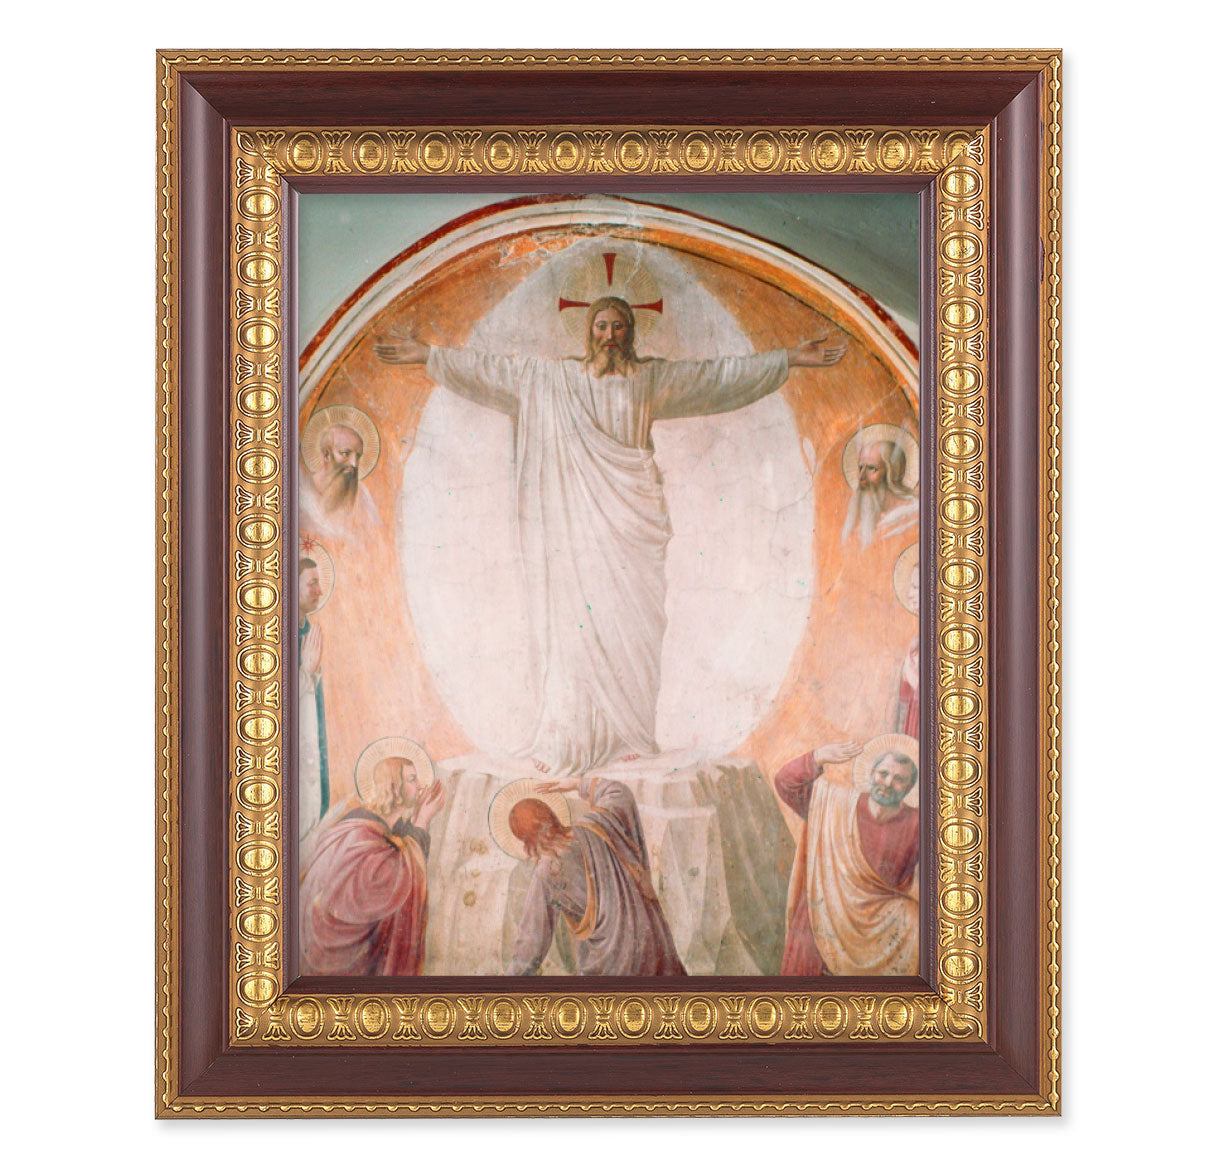 Transfiguration of Christ Picture Framed Wall Art Decor Large, Dark Cherry with Gold Egg and Dart Detailed Frame